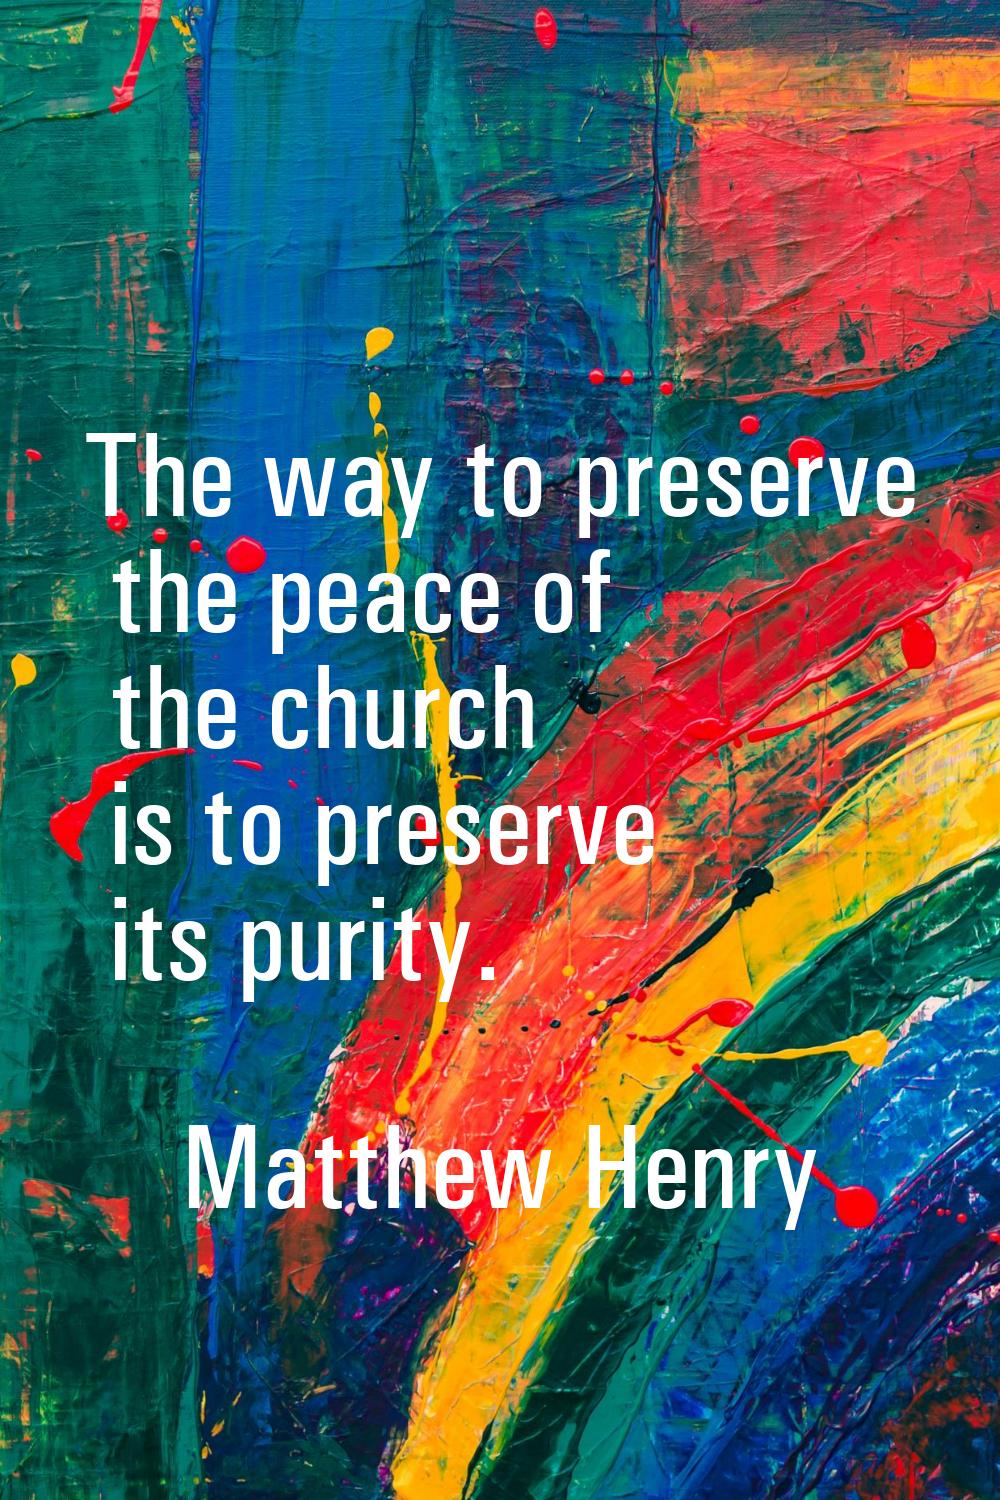 The way to preserve the peace of the church is to preserve its purity.